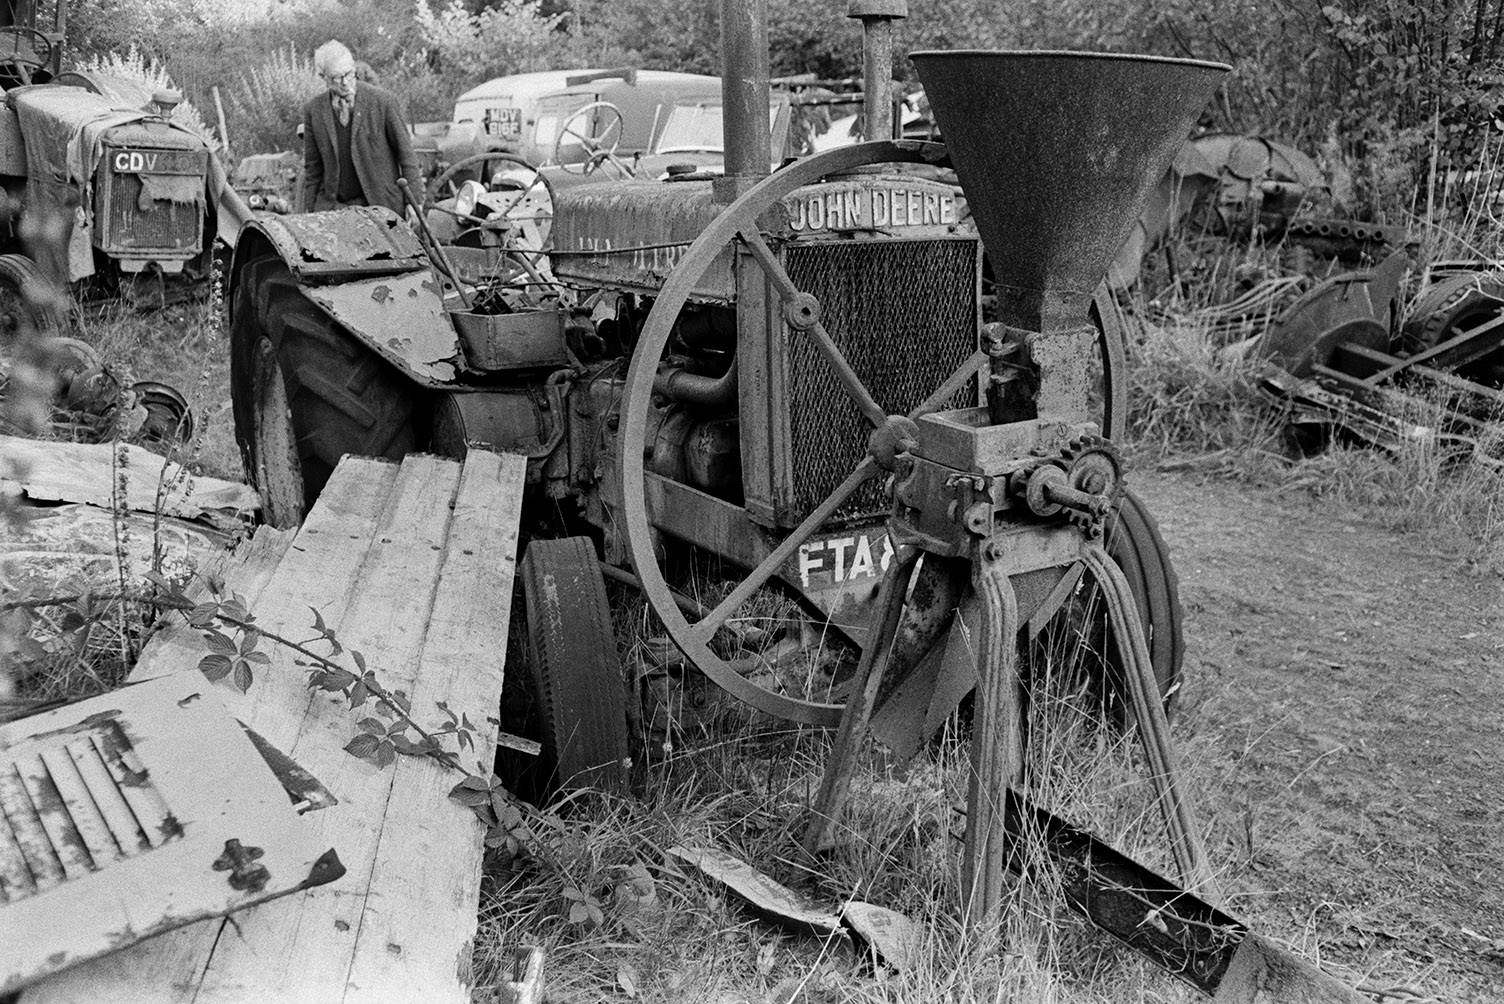 Mr Weeks looking at old farm machinery including a John Deer tractor and old vans, in a reclamation yard at Umberleigh.